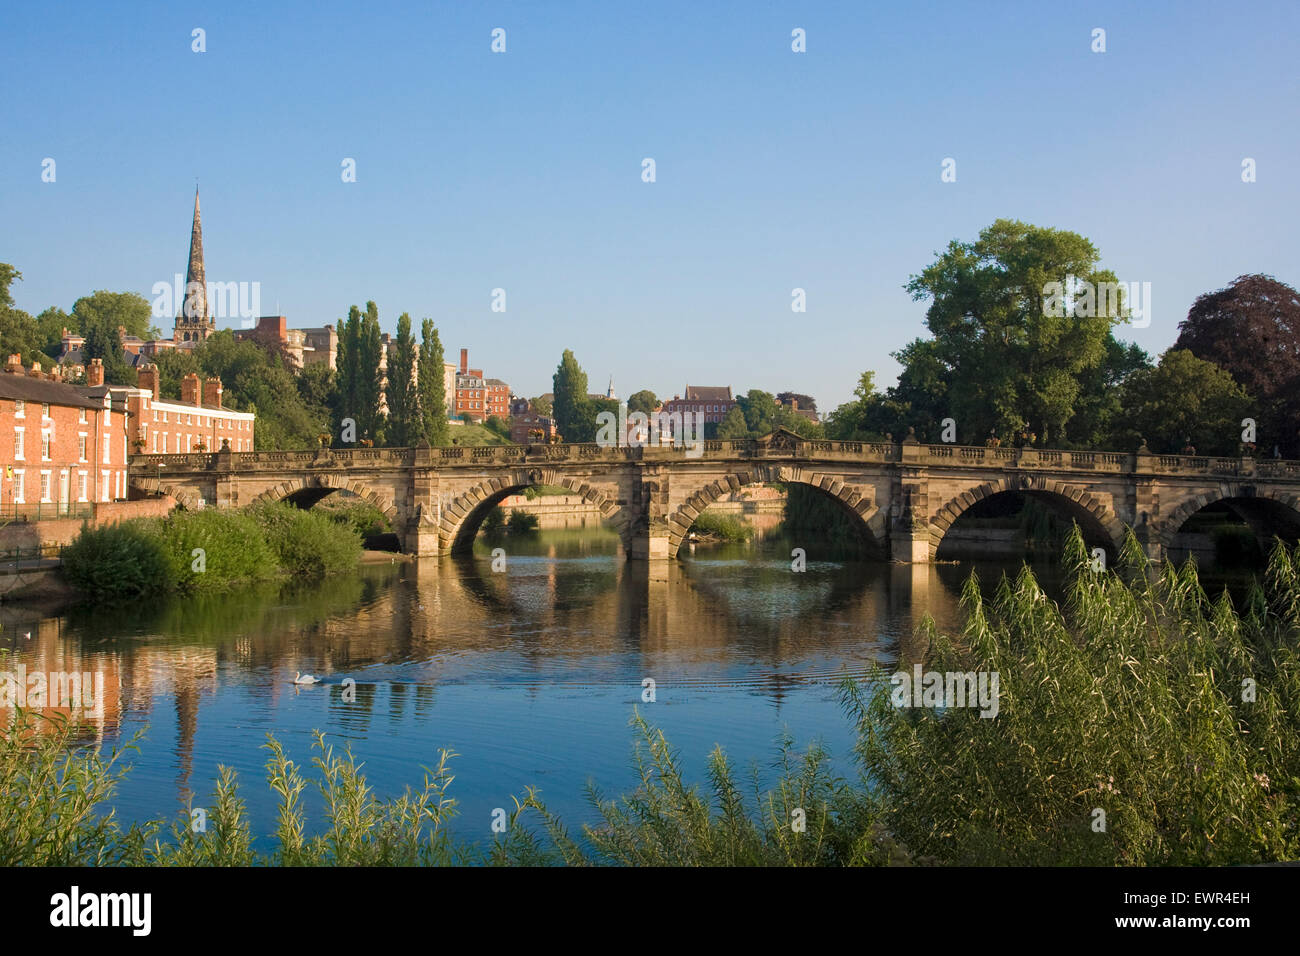 Under clear blue skies, English Bridge crosses the River Severn in Shrewsbury, Shropshire. Picture taken early in the morning in August 2014. Stock Photo